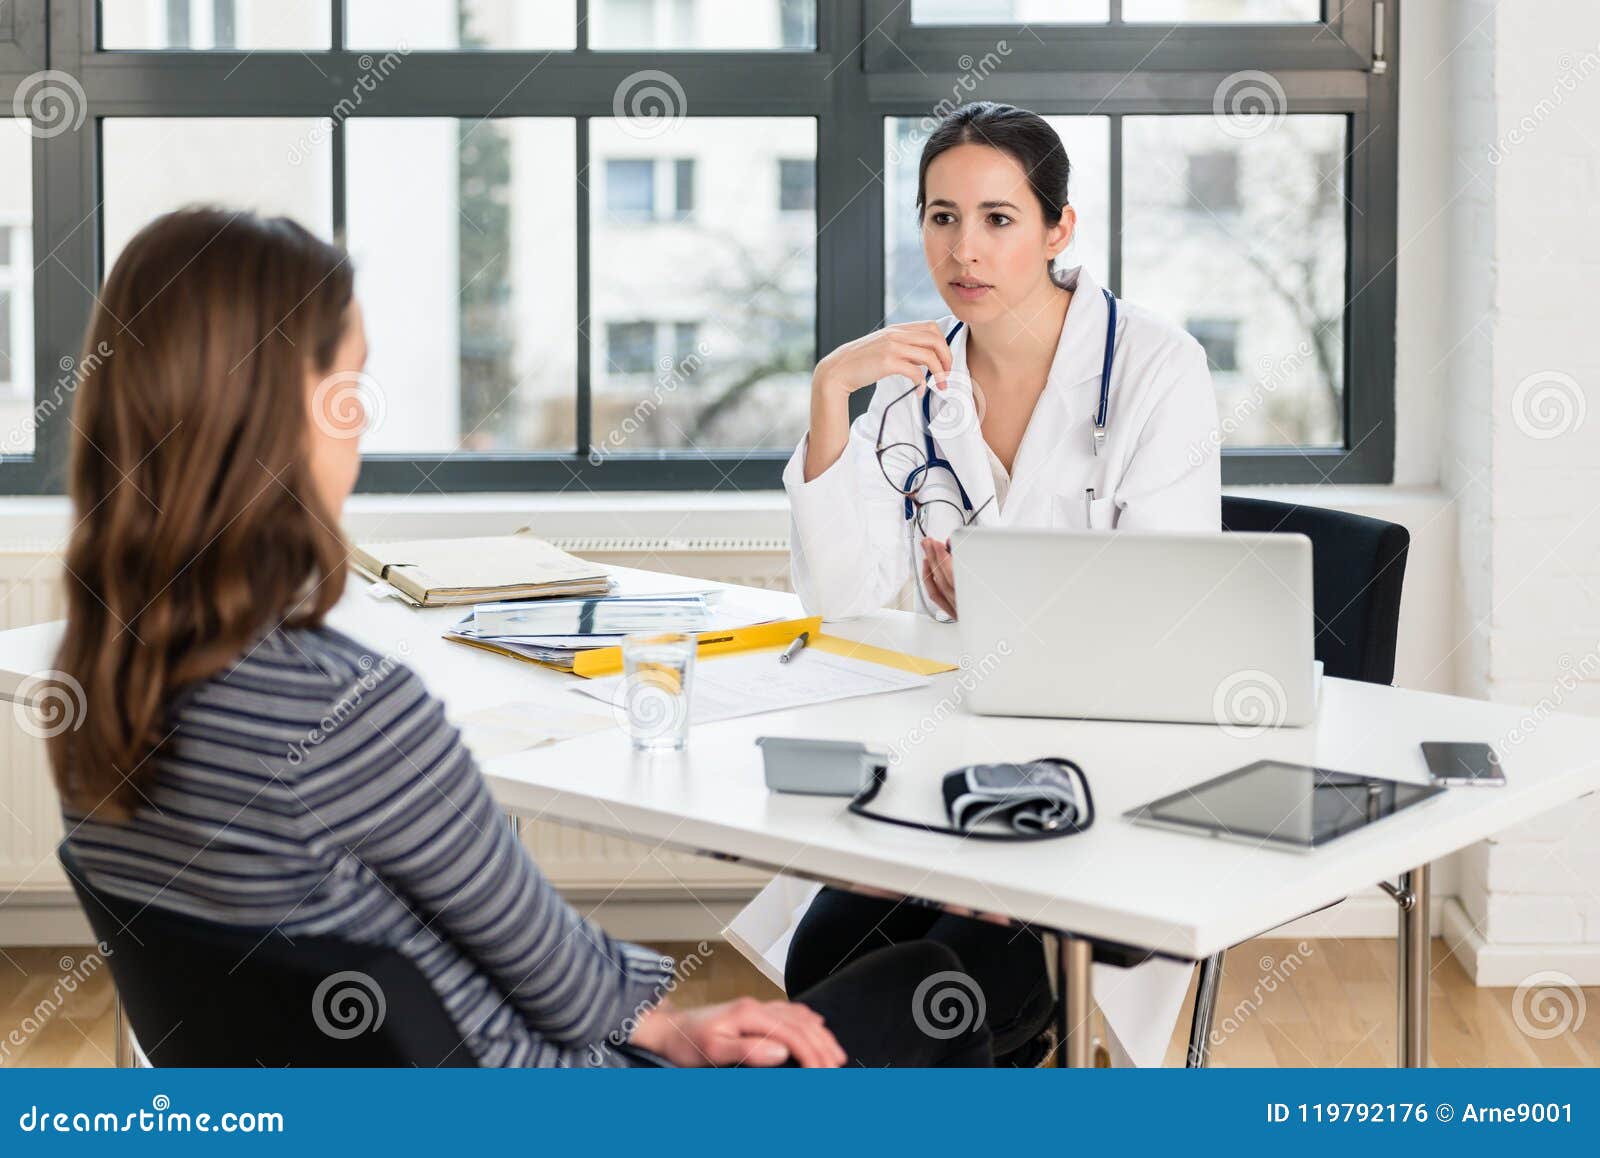 dedicated doctor listening to her patient during a private consultation